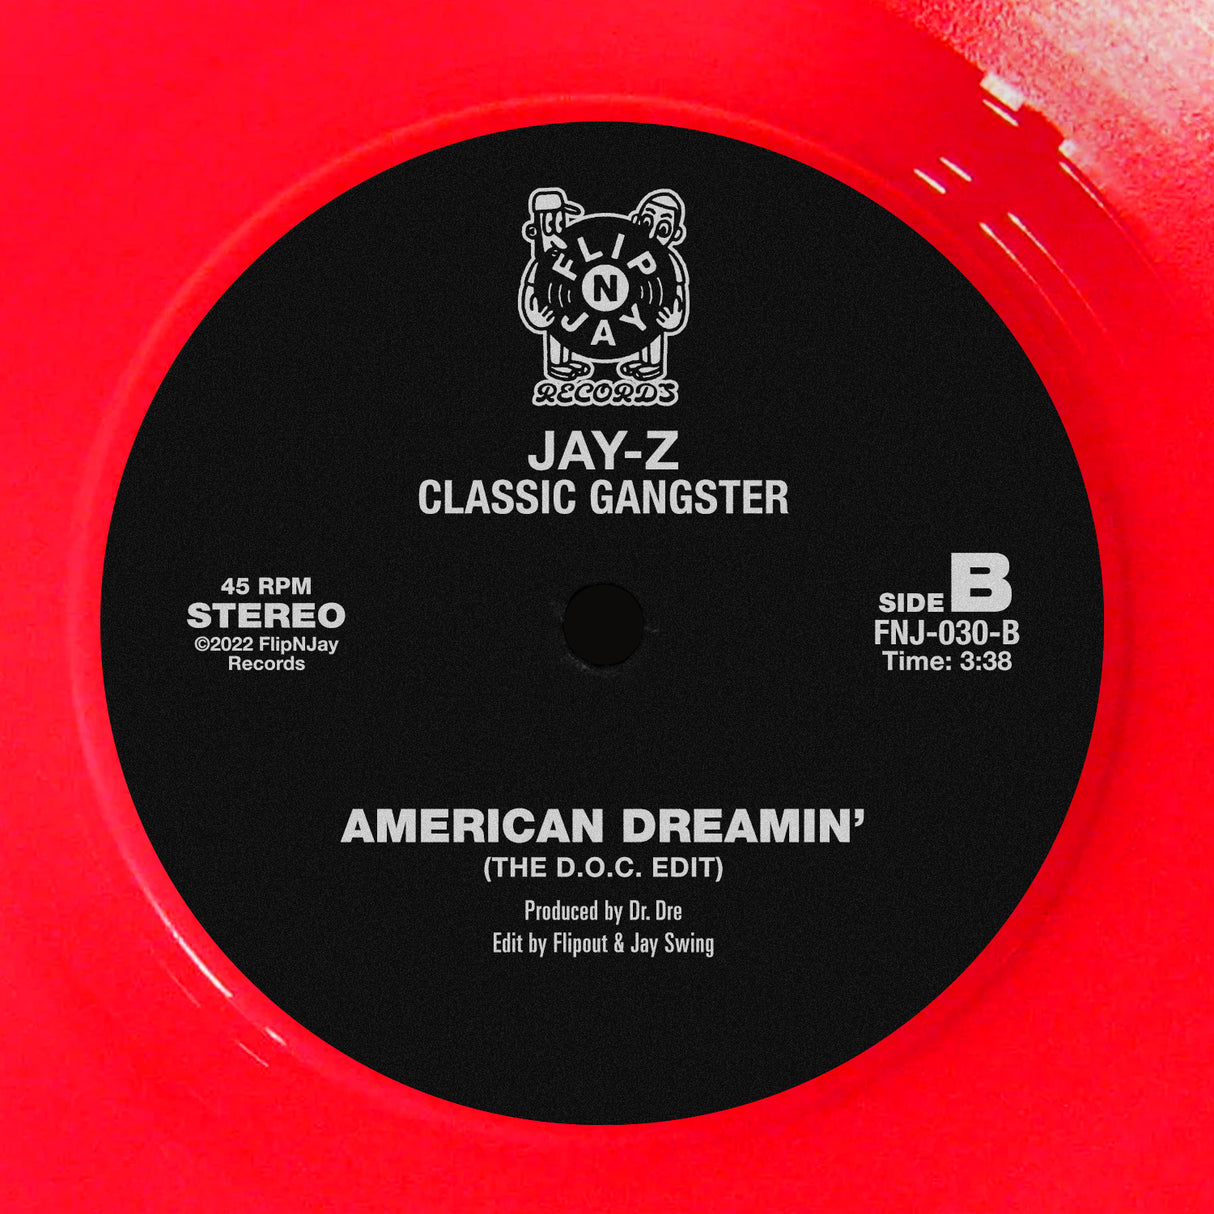 Jay-Z Classic Gangster Edits By Flipout & Jay Swing – American Gangster / American Dreamin 7-Inch